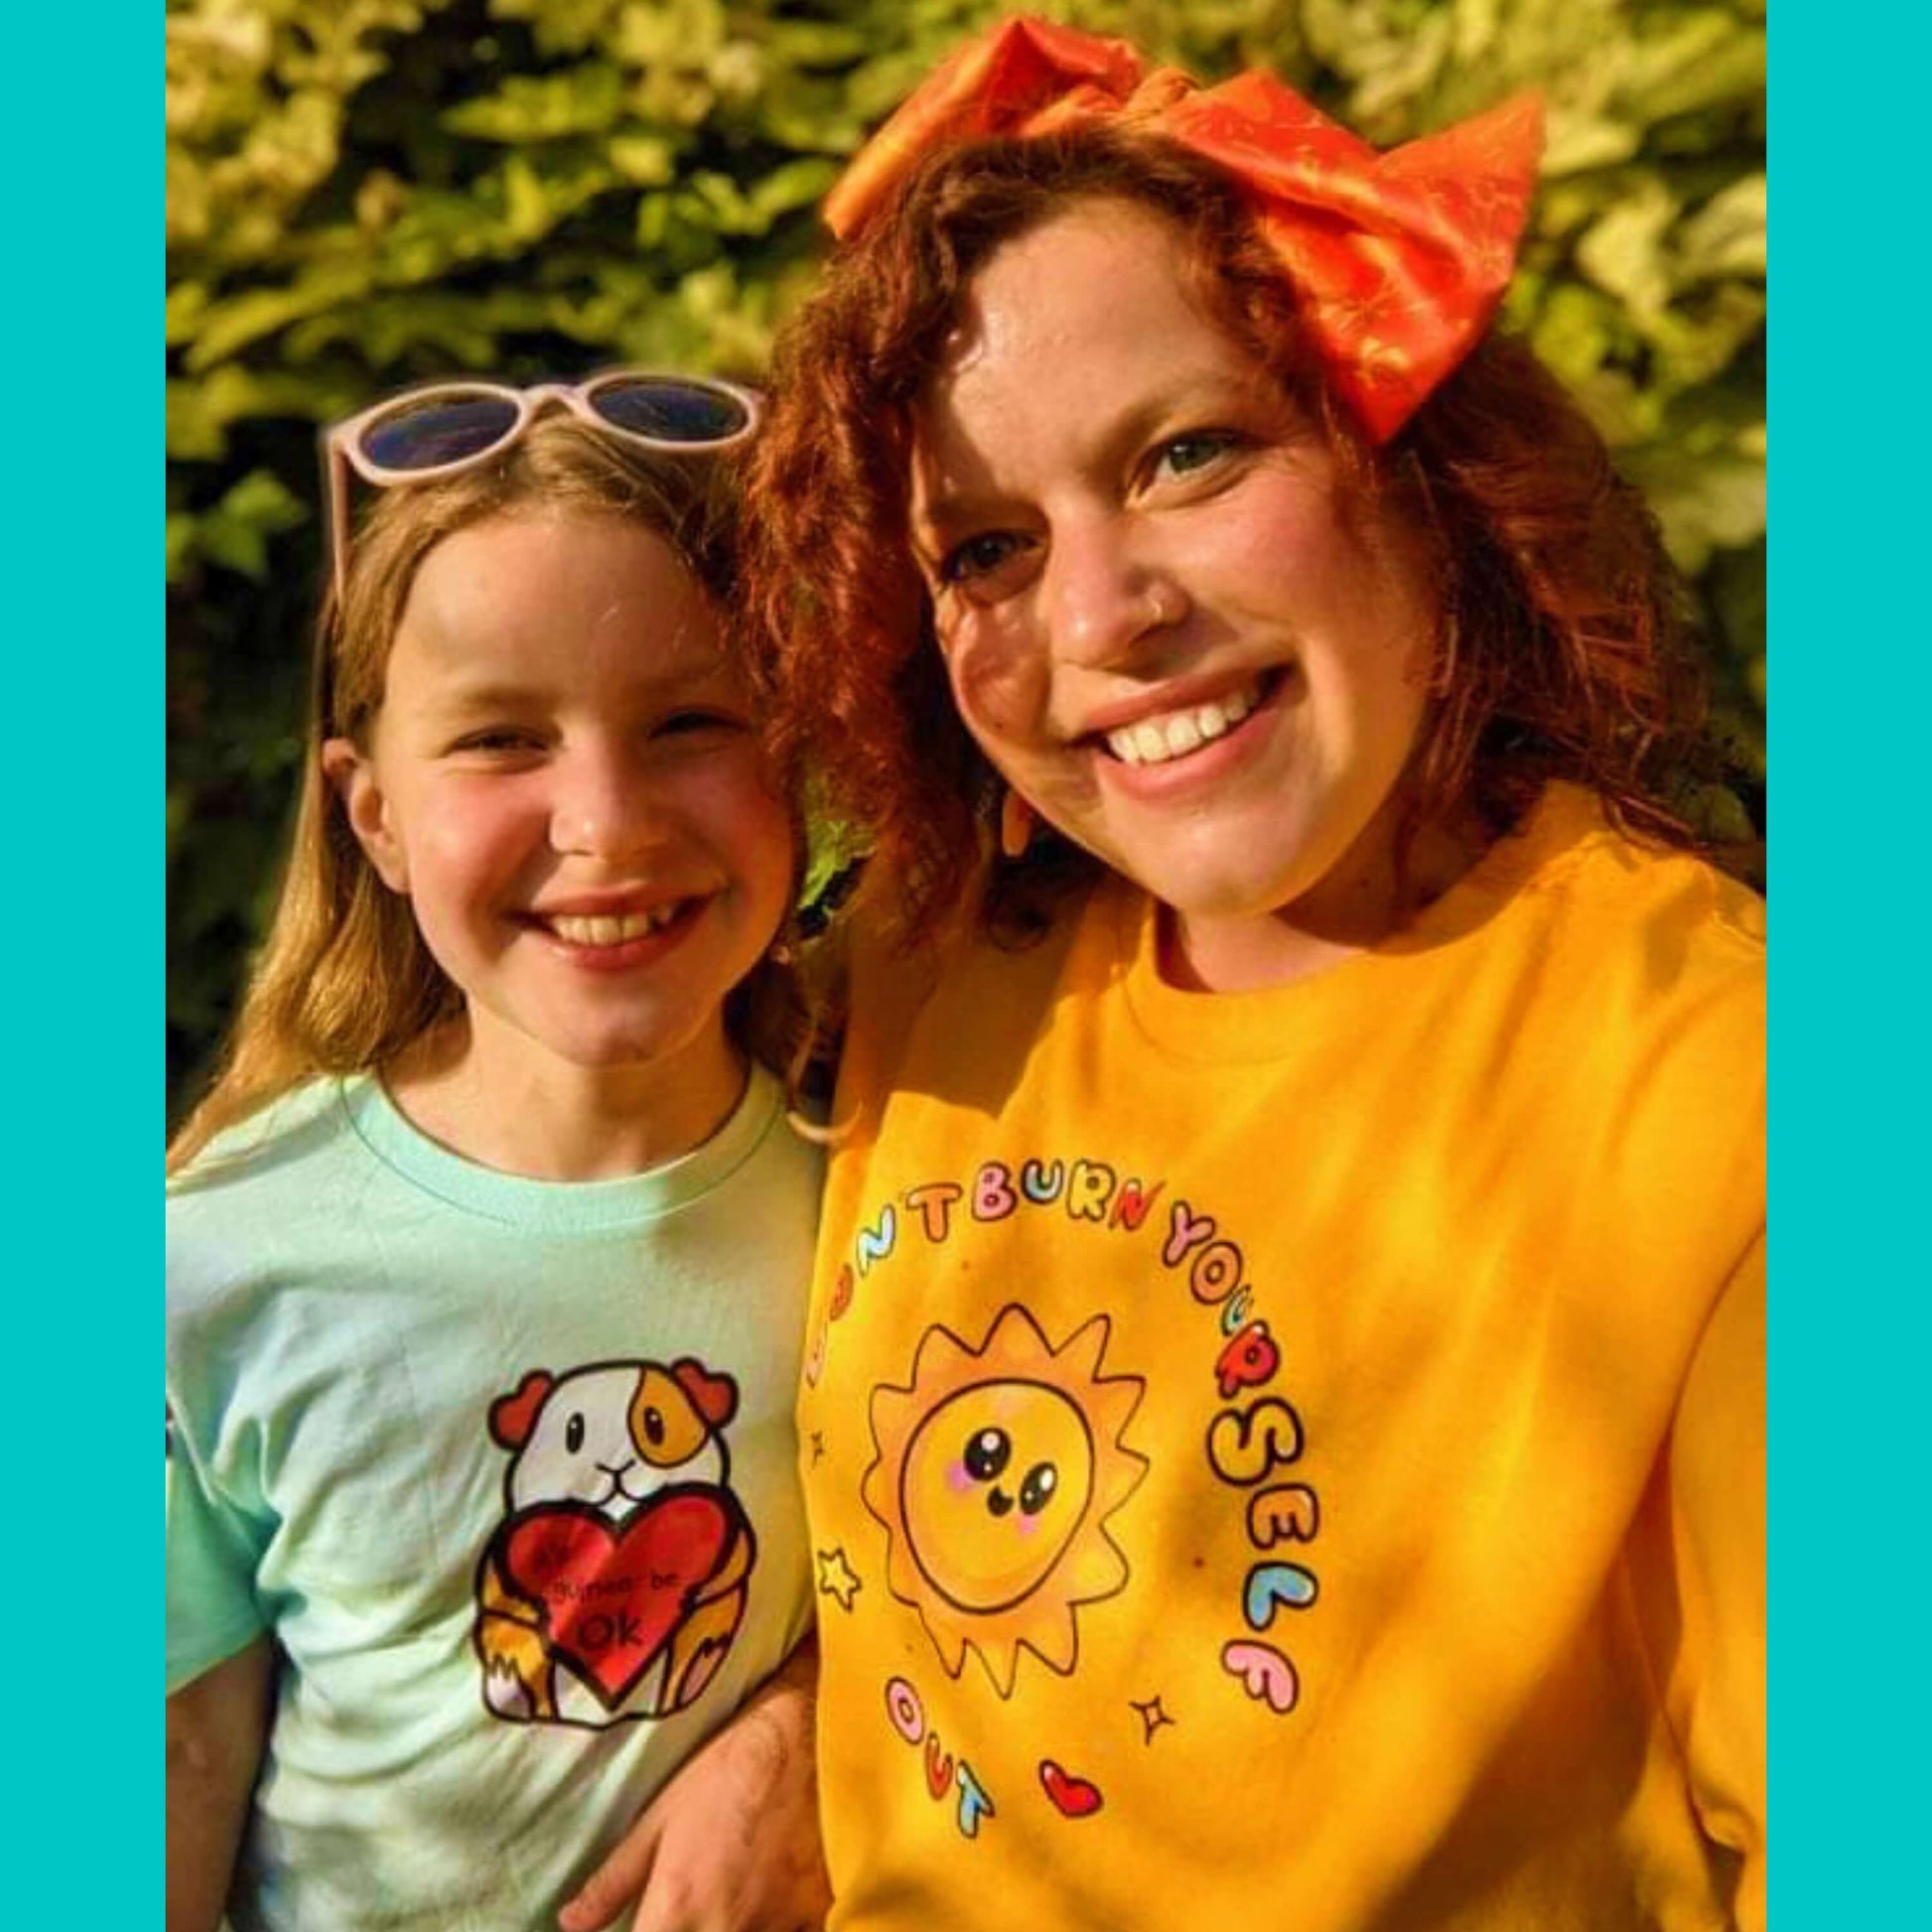 The Don't Burn Yourself Out Tee being worn by a smiling customer with red curly hair taking a selfie outside with their daughter wearing the guinea be ok tshirt from innabox. The yellow base cotton tshirt features a smiling happy sunshine with red, yellow and blue polka dots, a red heart, a yellow star and black sparkles surrounding it. Around the sunshine in rainbow bubble writing reads 'don't burn yourself out'. The design is a gentle reminder to practise self care.